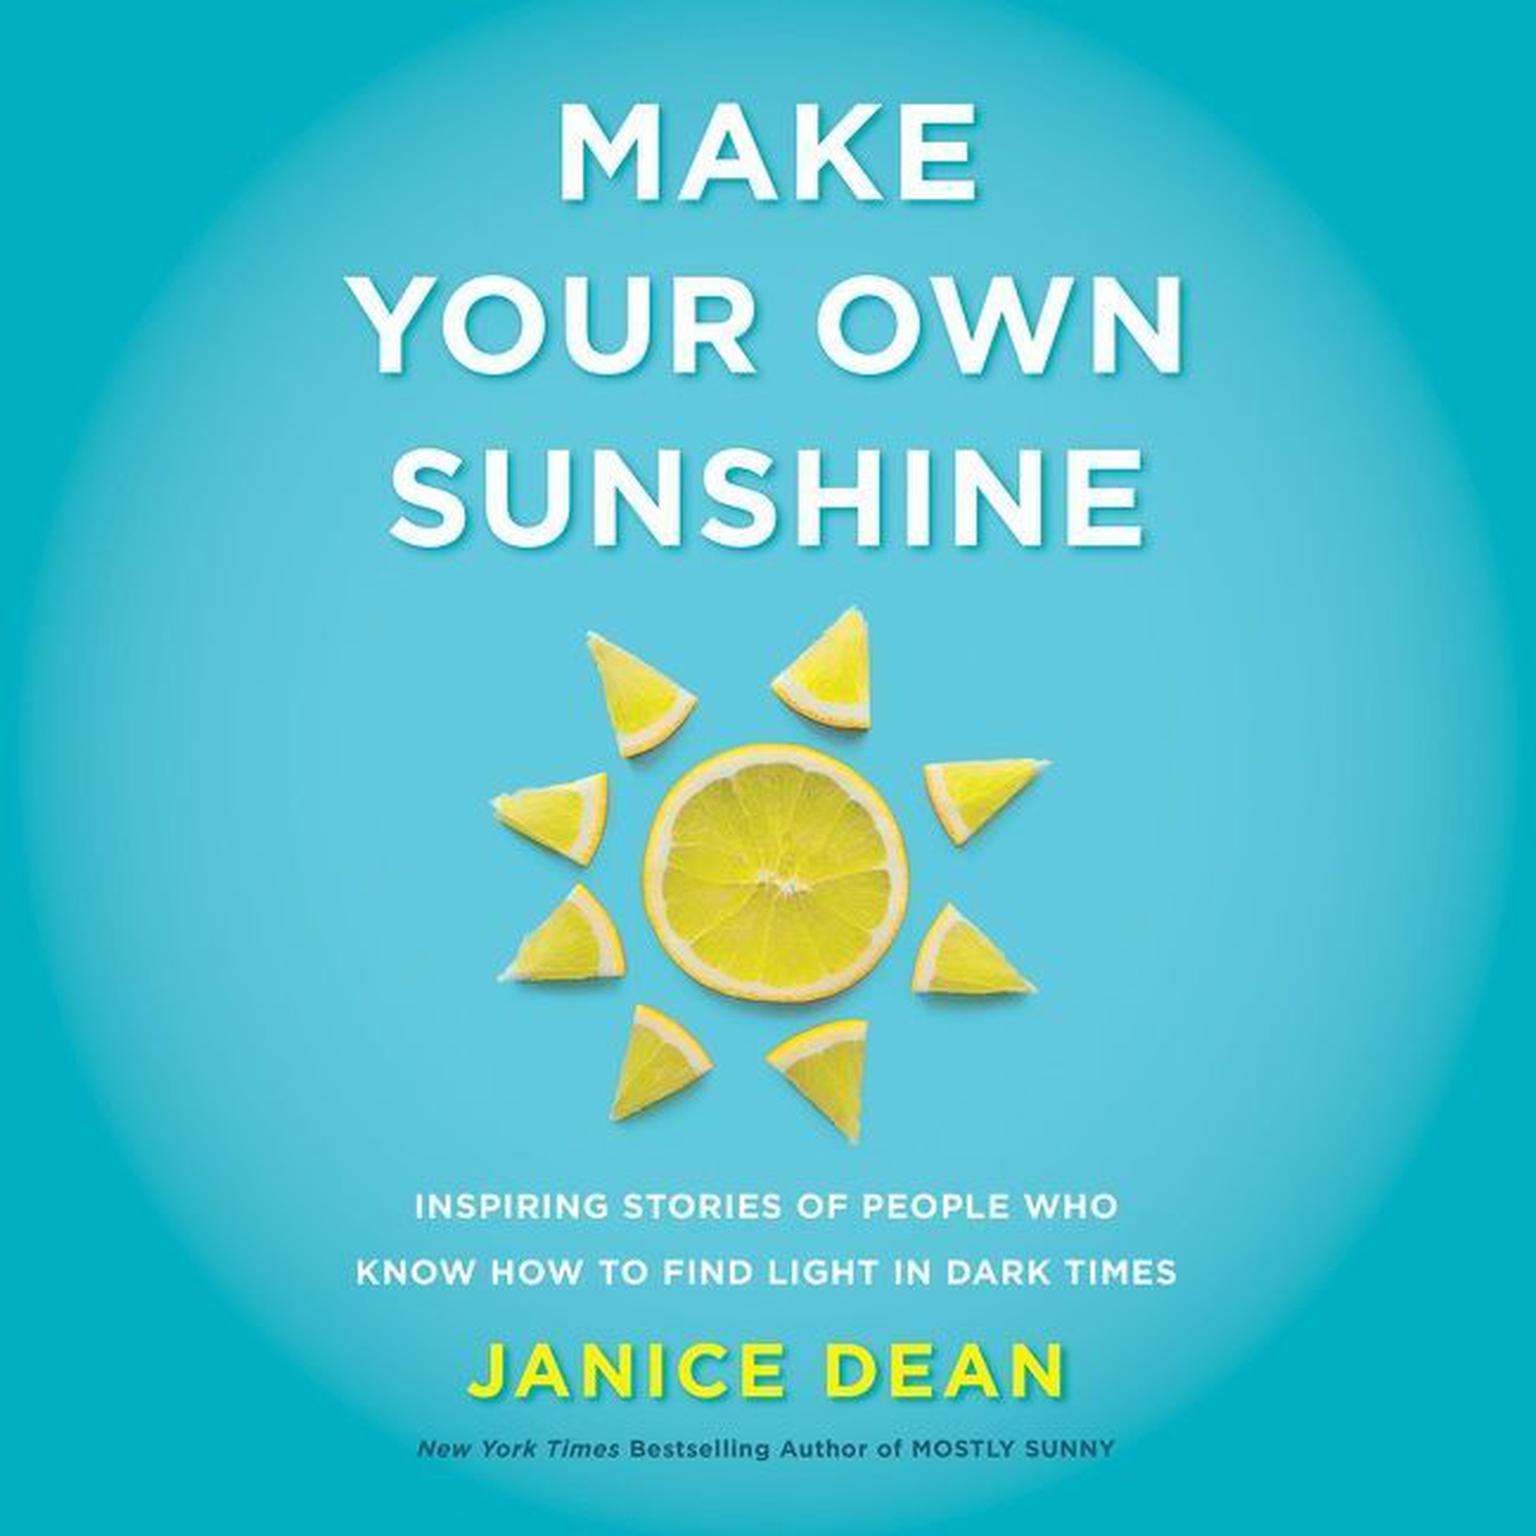 Make Your Own Sunshine: Inspiring Stories of People Who Find Light in Dark Times Audiobook, by Janice Dean